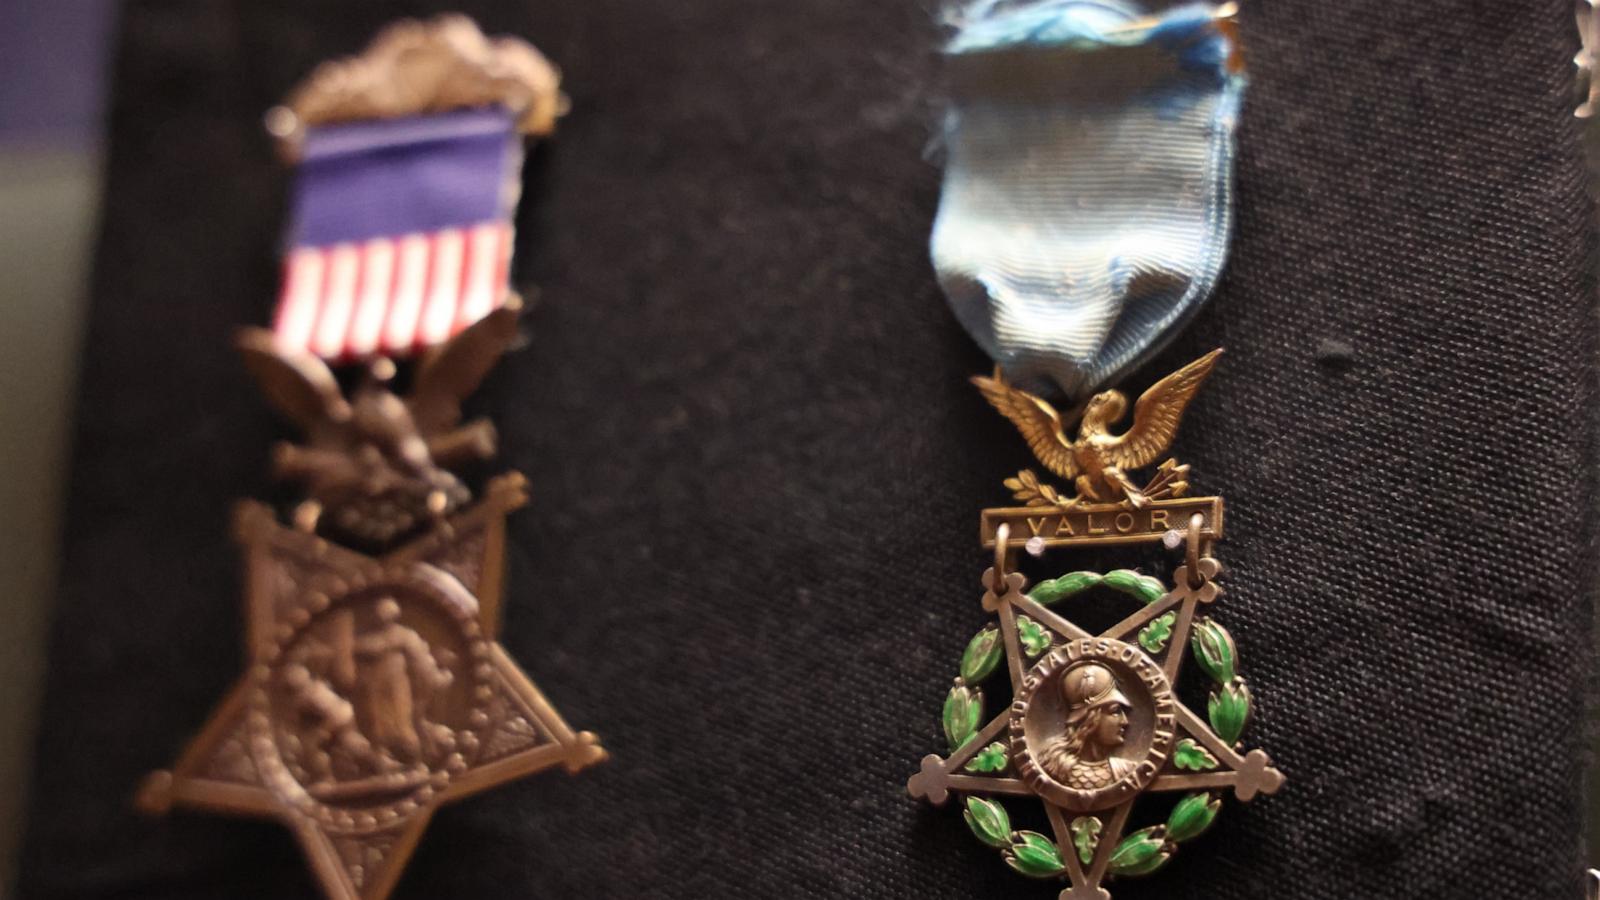 Biden to award Medal of Honor to Civil War heroes, 162 years later